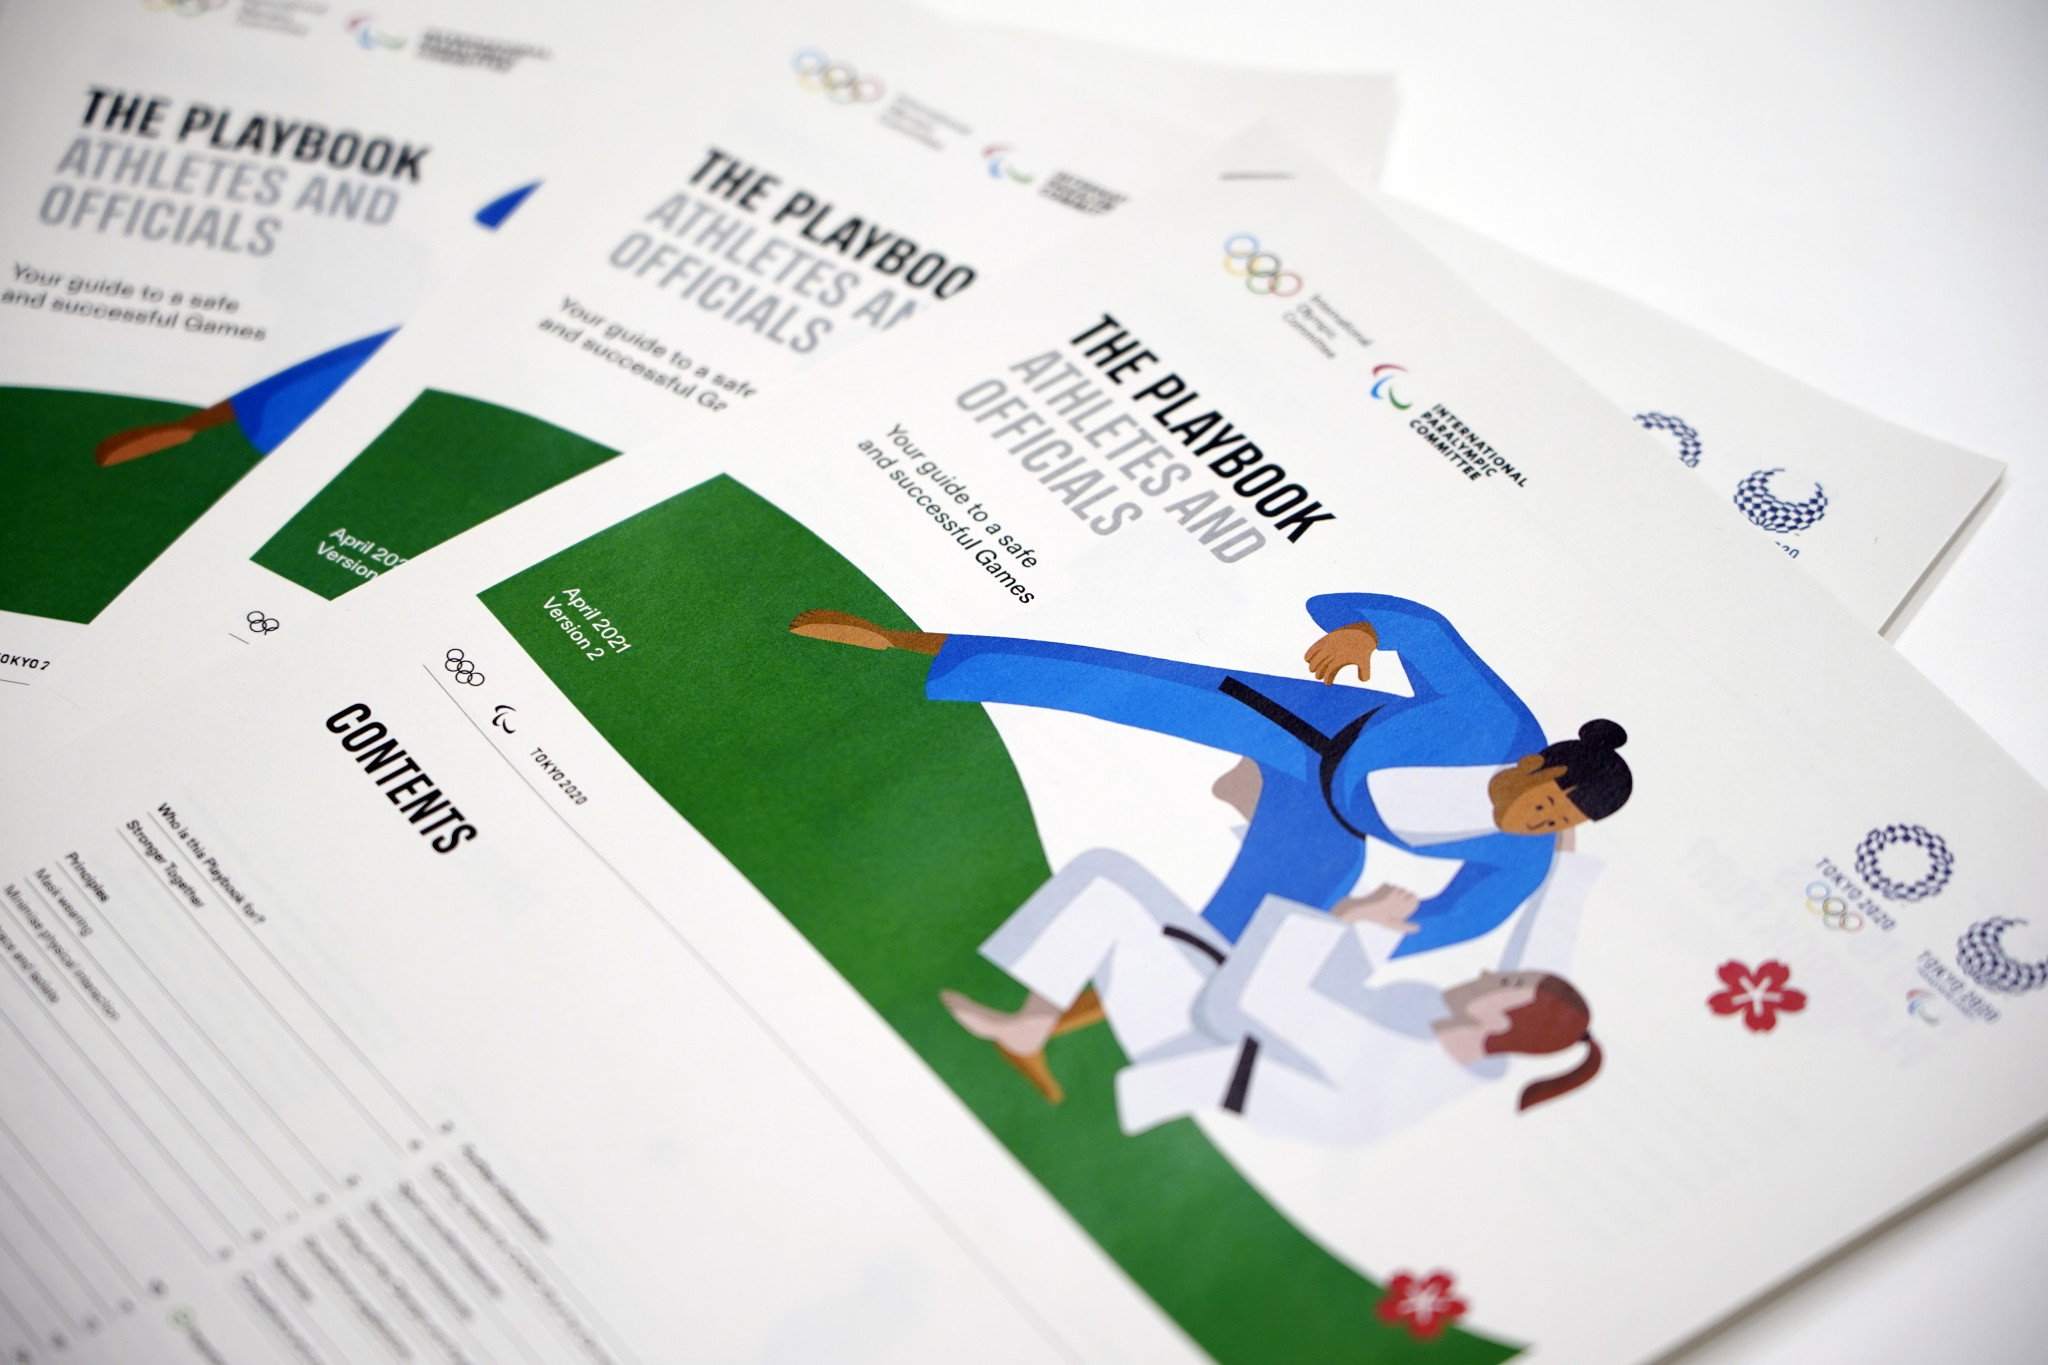 Tokyo 2020 published the latest athlete playbooks for the Olympic and Paralympic Games yesterday ©Getty Images